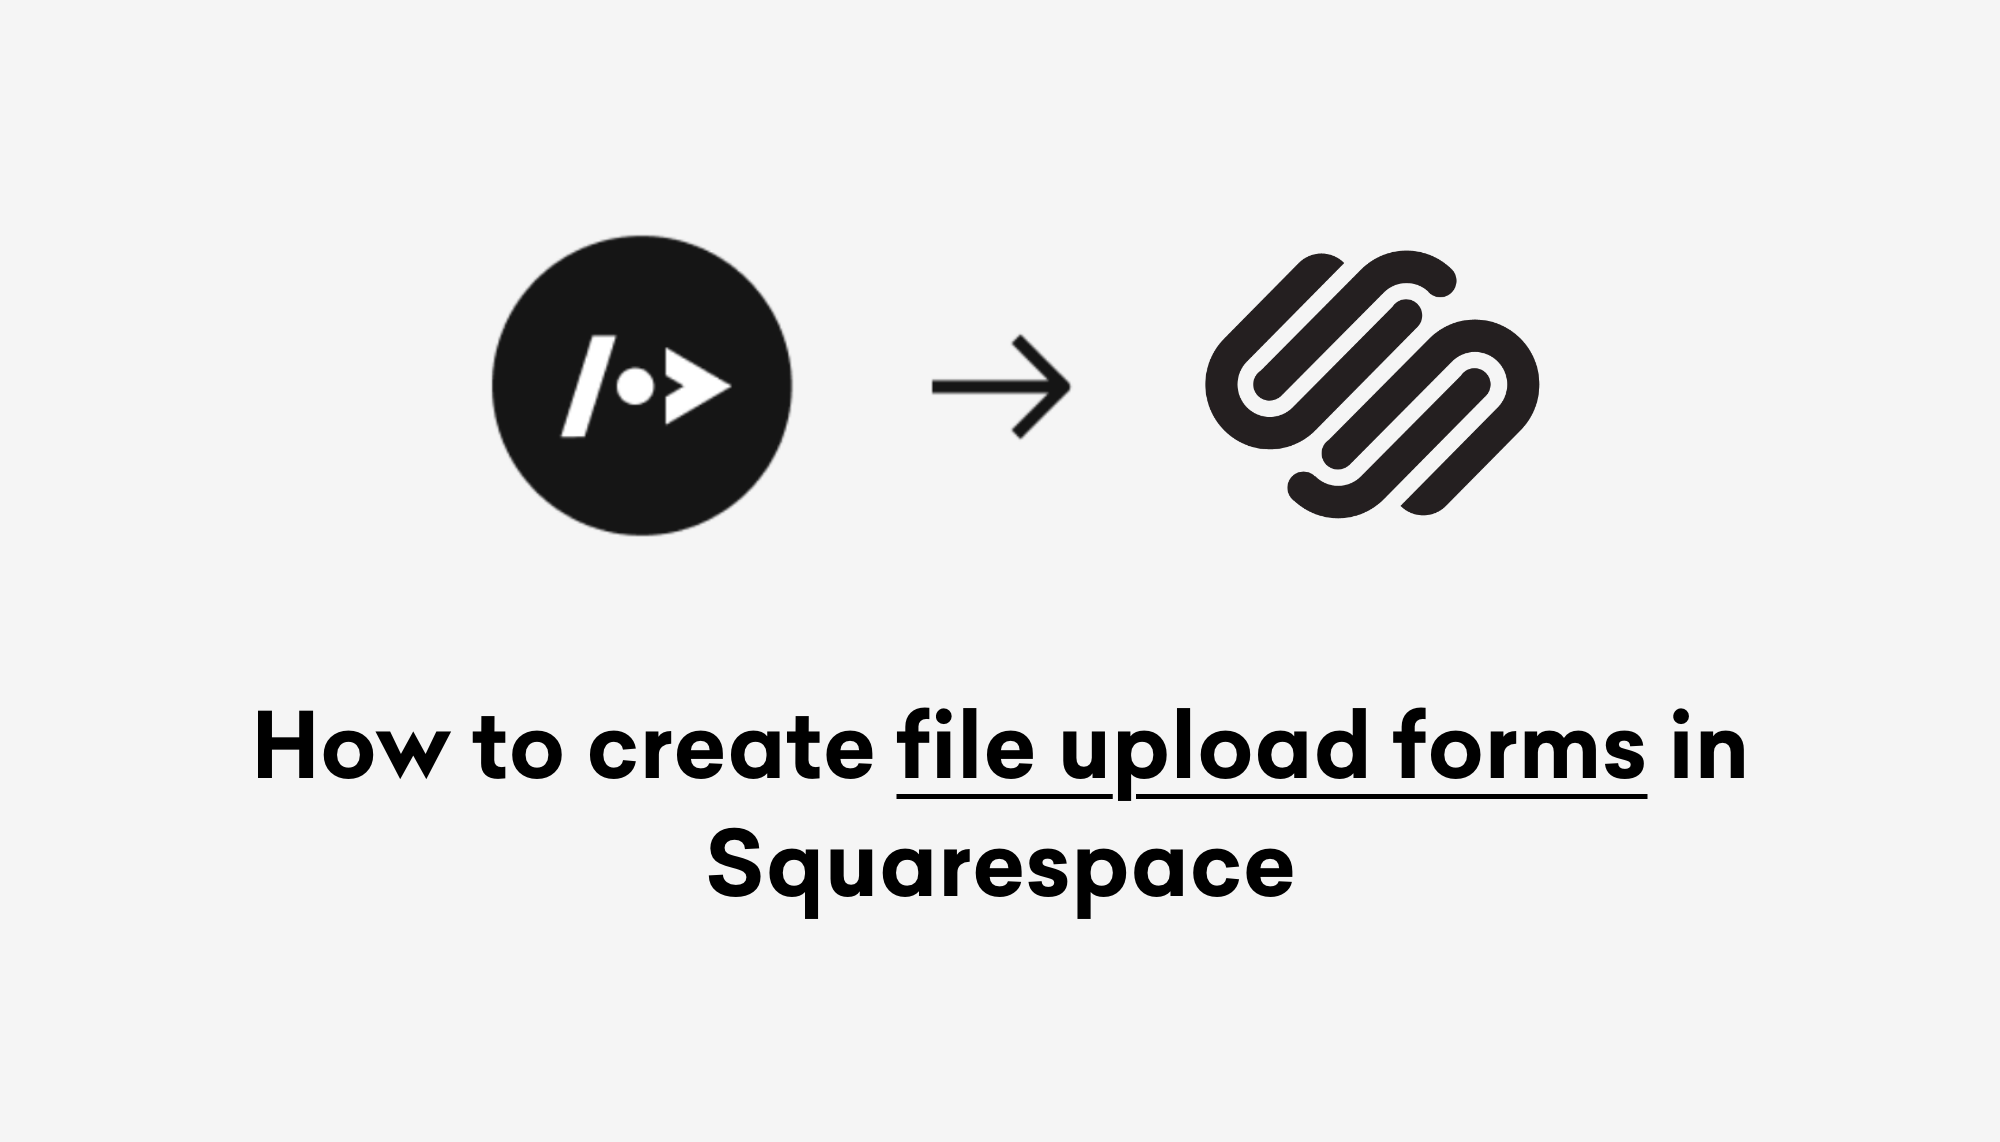 How to create file upload forms in Squarespace